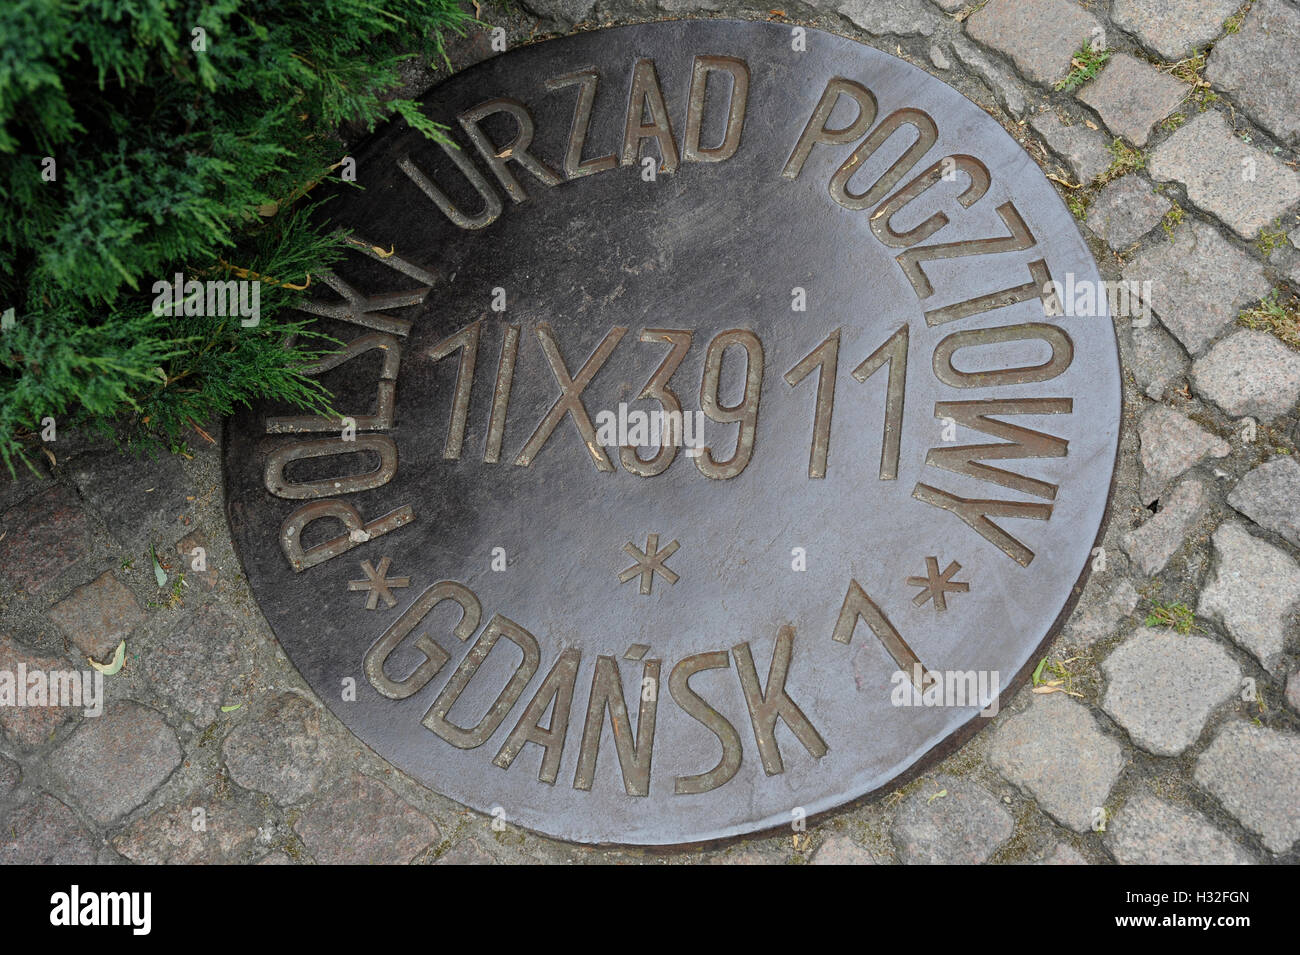 Poland. Gdansk. Monument of Defense of the Polish Post Office in Danzig (Gdansk). Plaque. Stock Photo